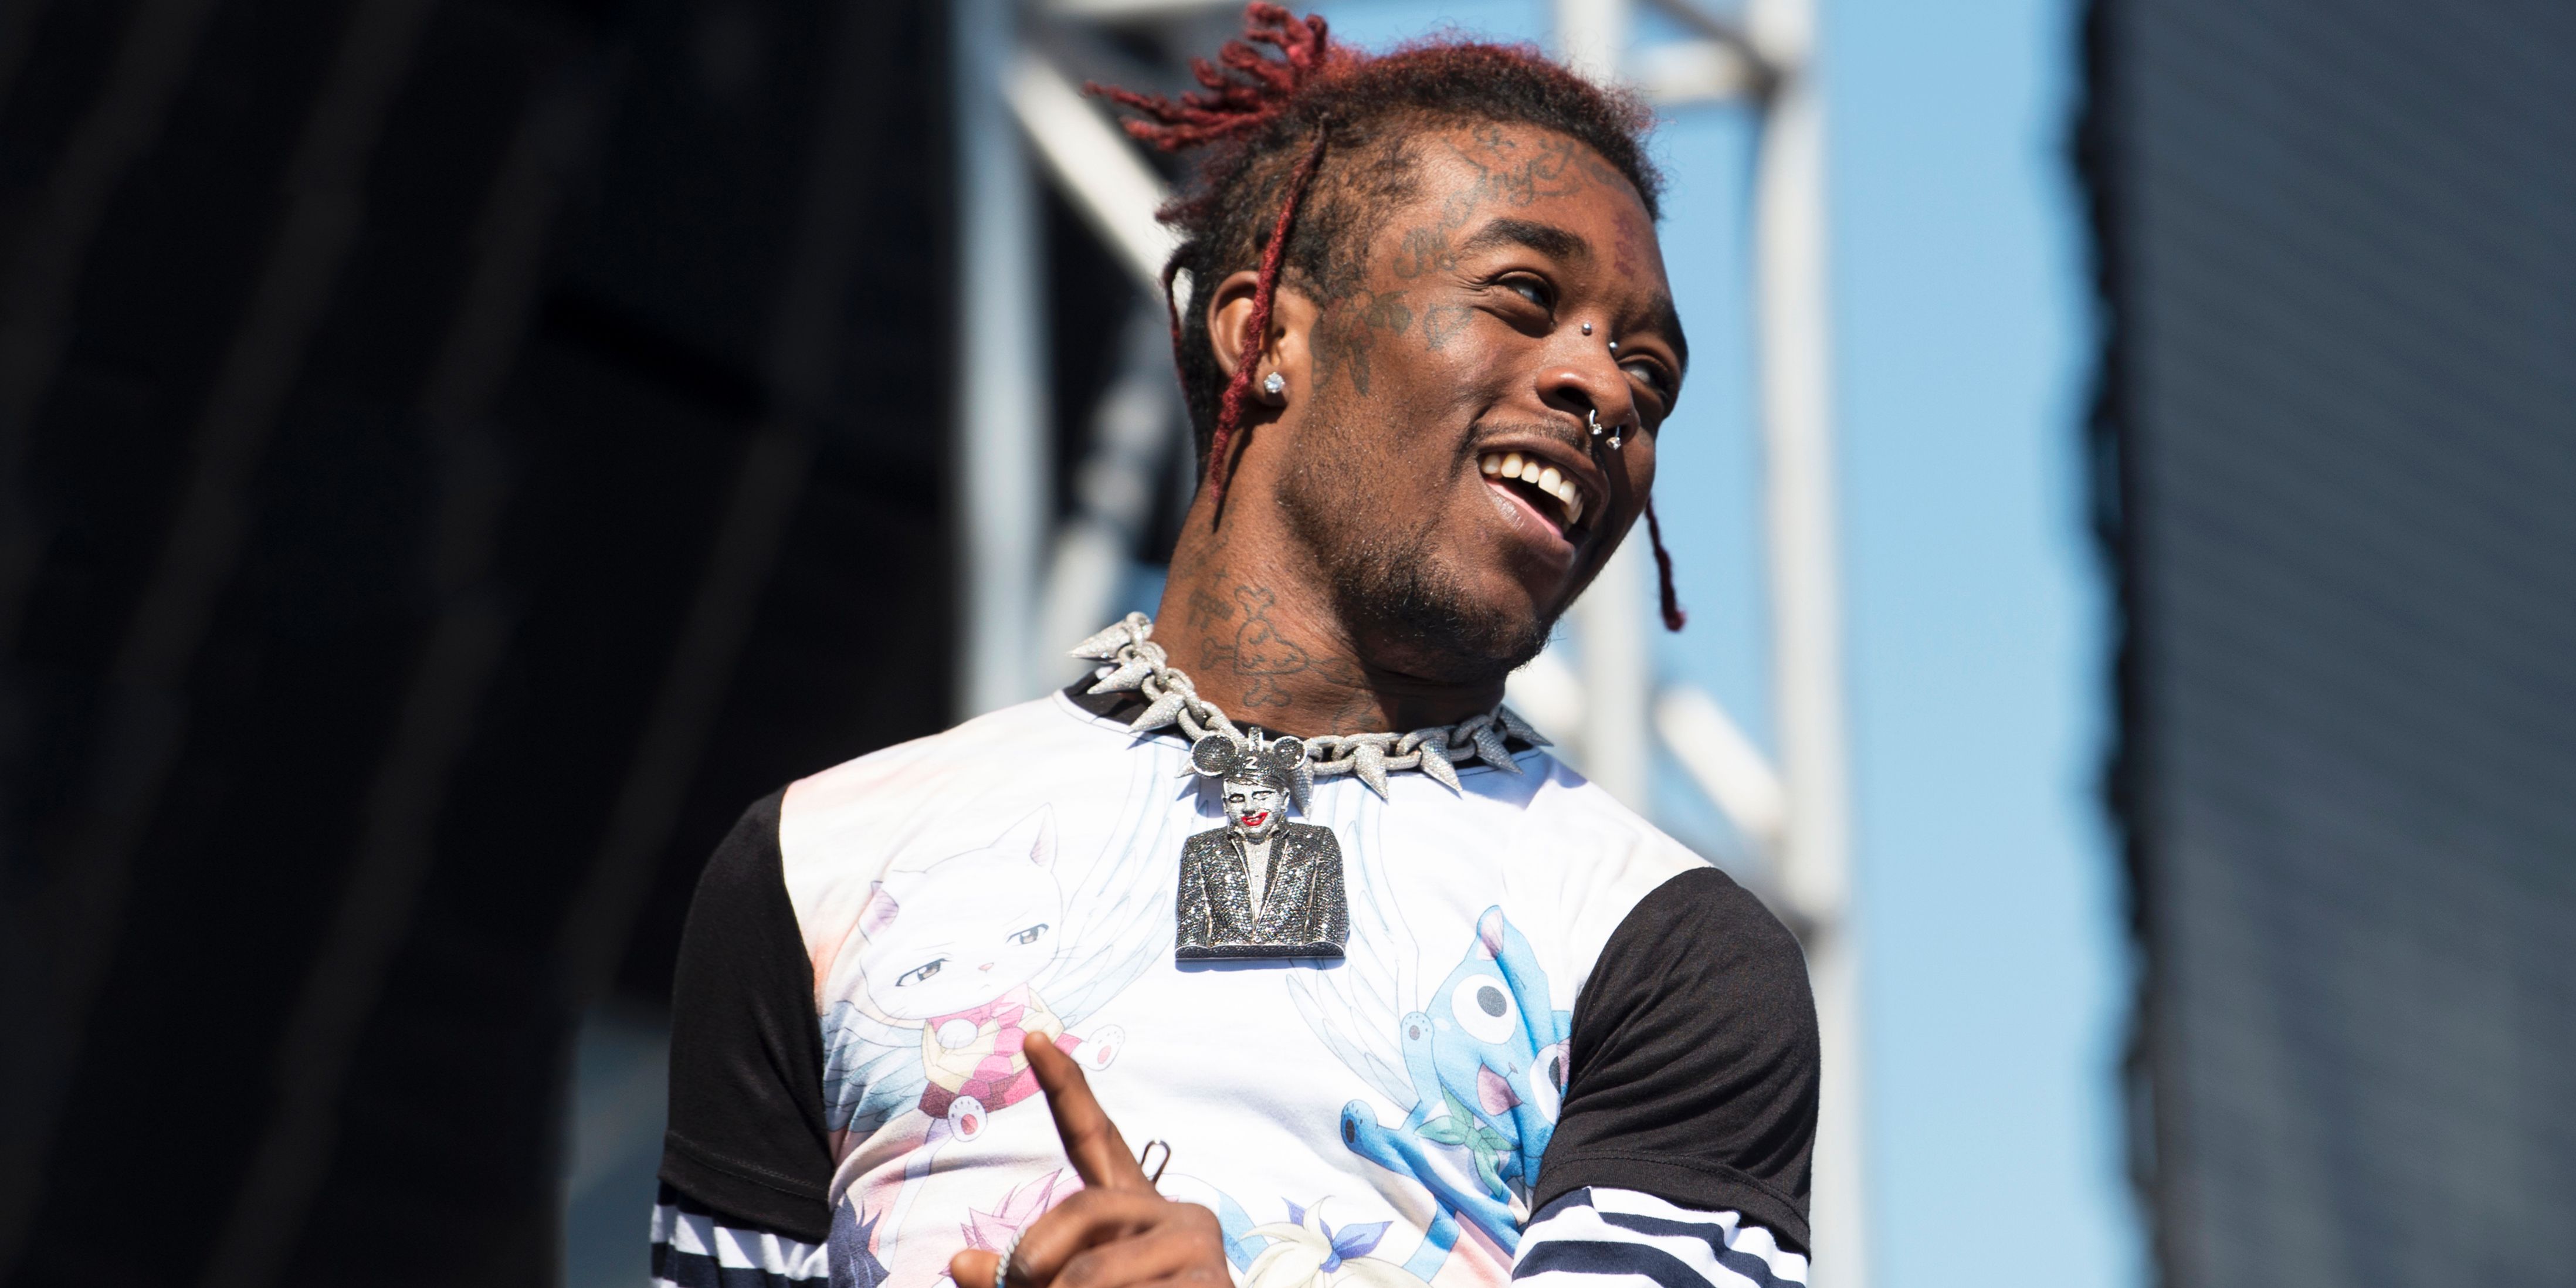 Lil Uzi Vert HD Wallpapers and Backgrounds